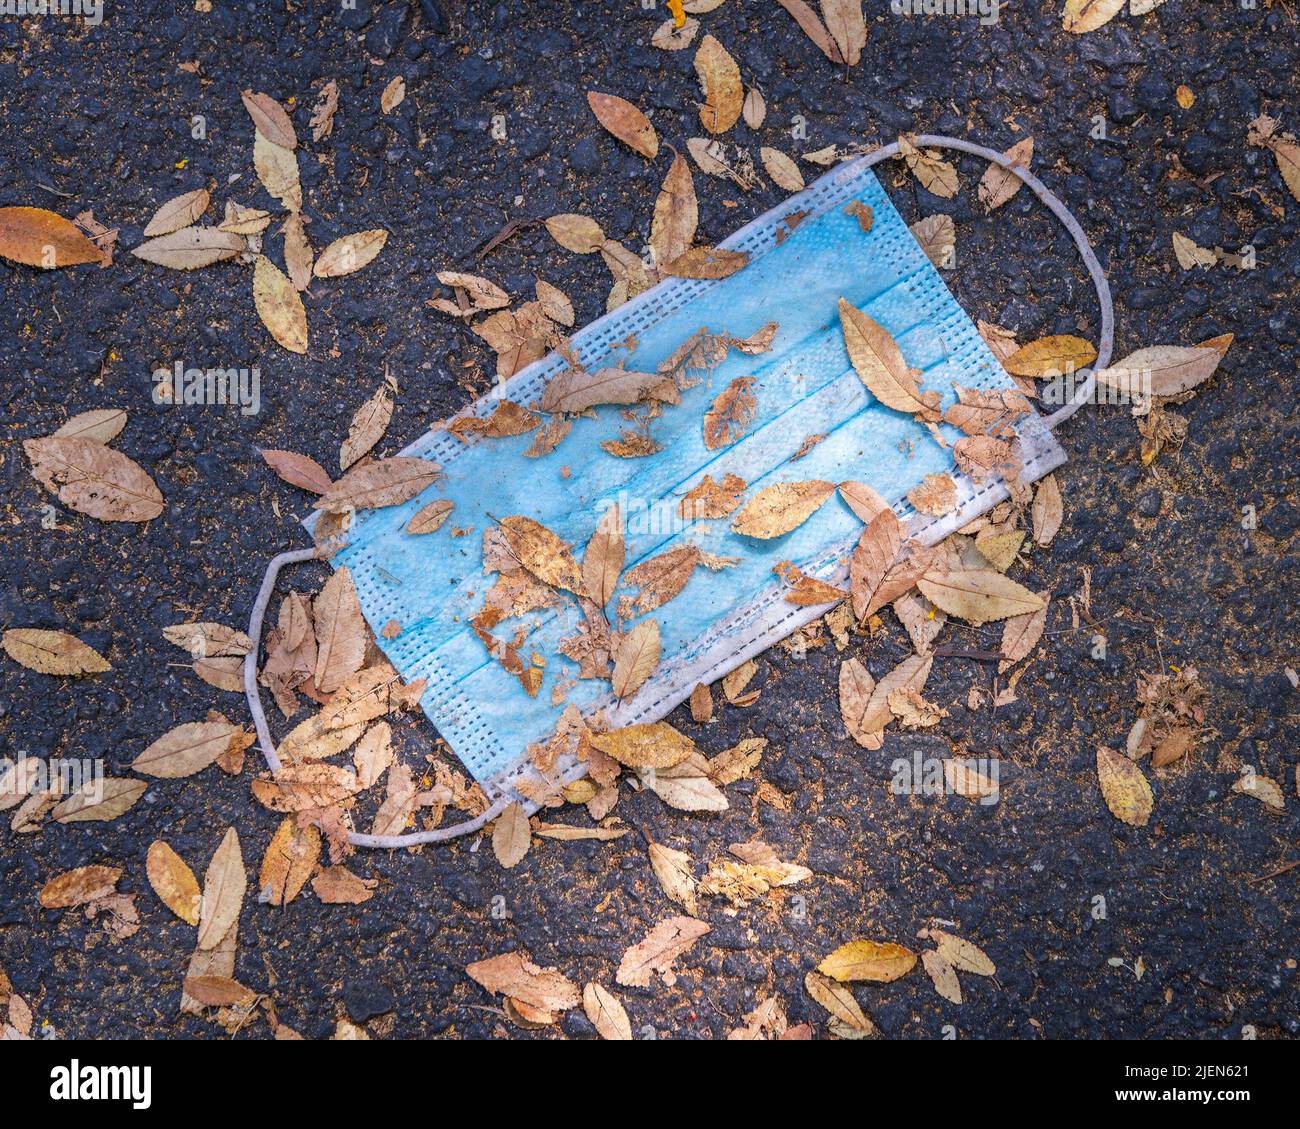 Close up of a discarded protective mask on the ground with dead leaves. Stock Photo